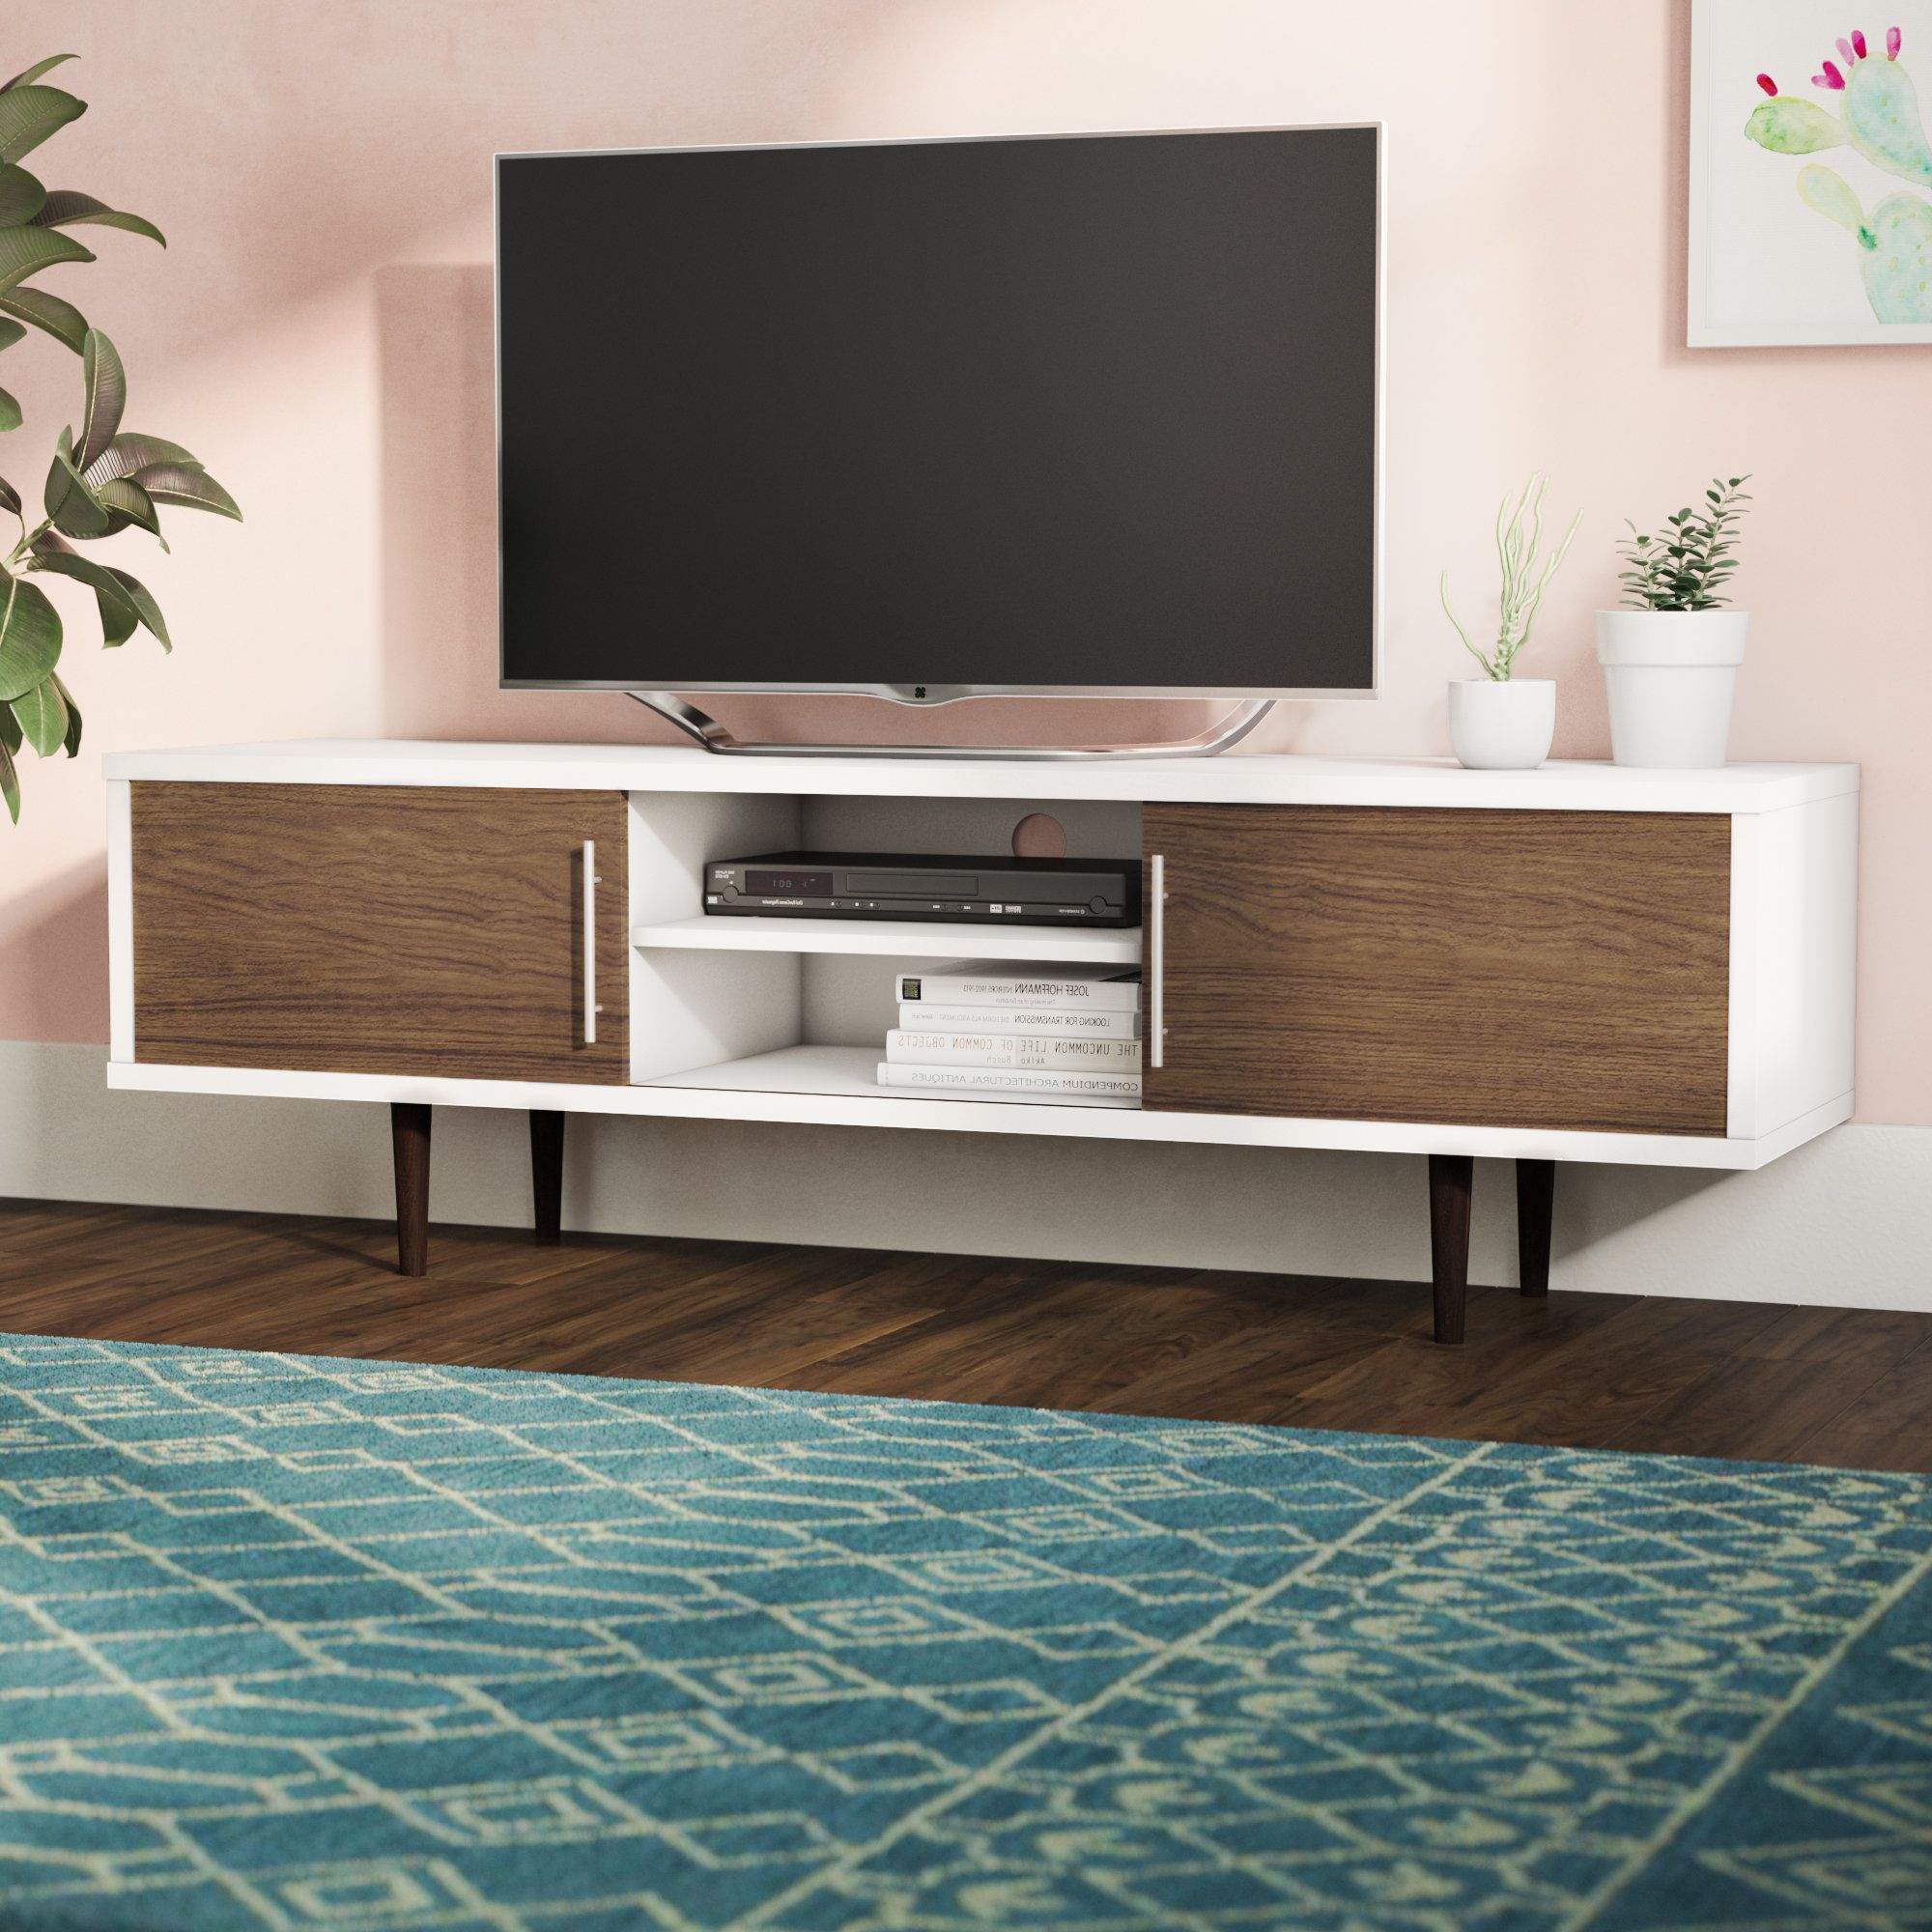 Low Level Tv Storage Units Inside Most Current Modern Tv Stands & Entertainment Centers (View 19 of 20)